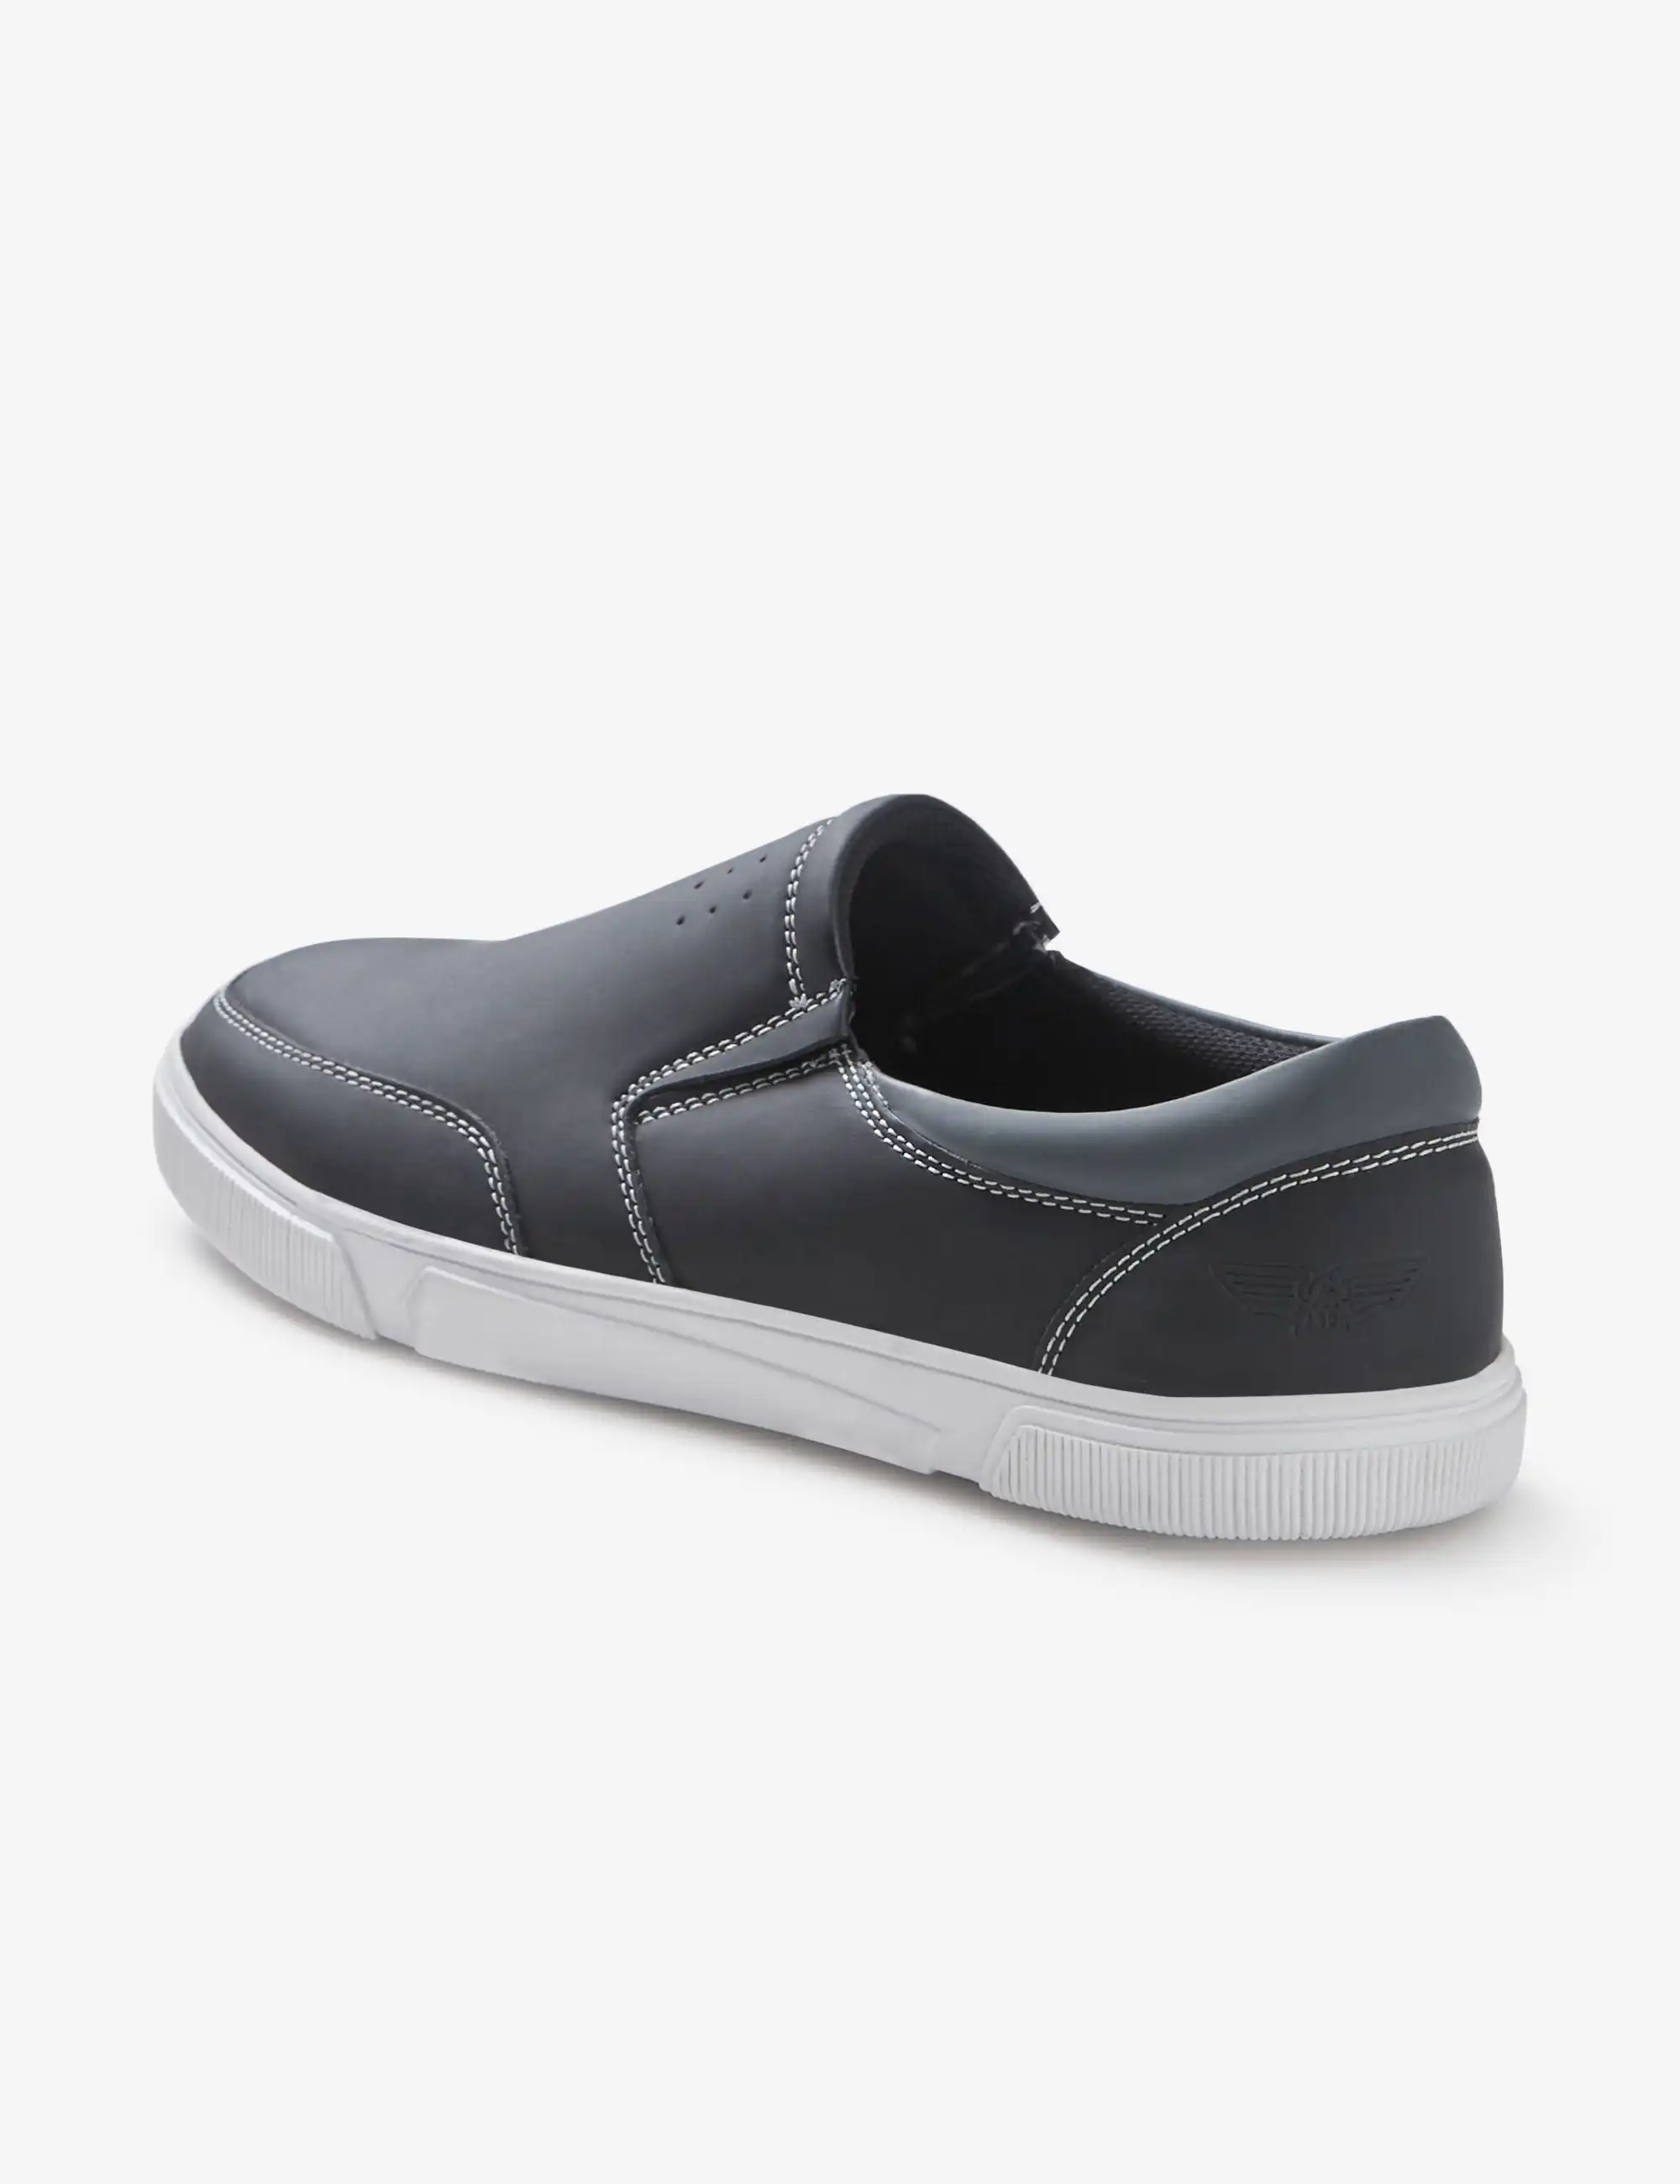 Rivers Slip On Casual Shoe